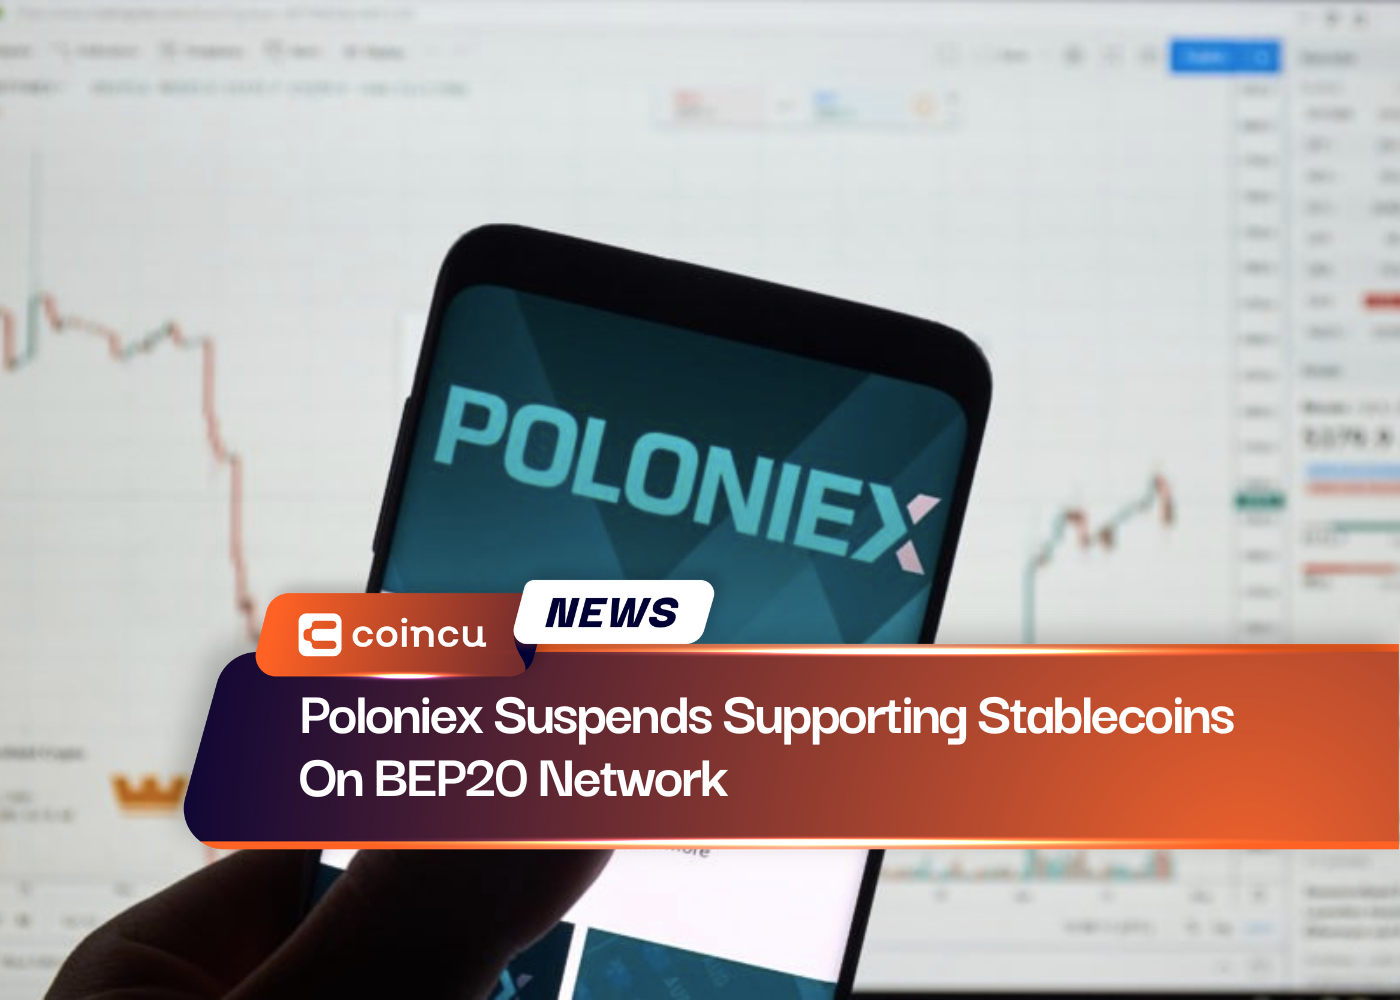 Poloniex Suspends Supporting Stablecoins On BEP20 Network